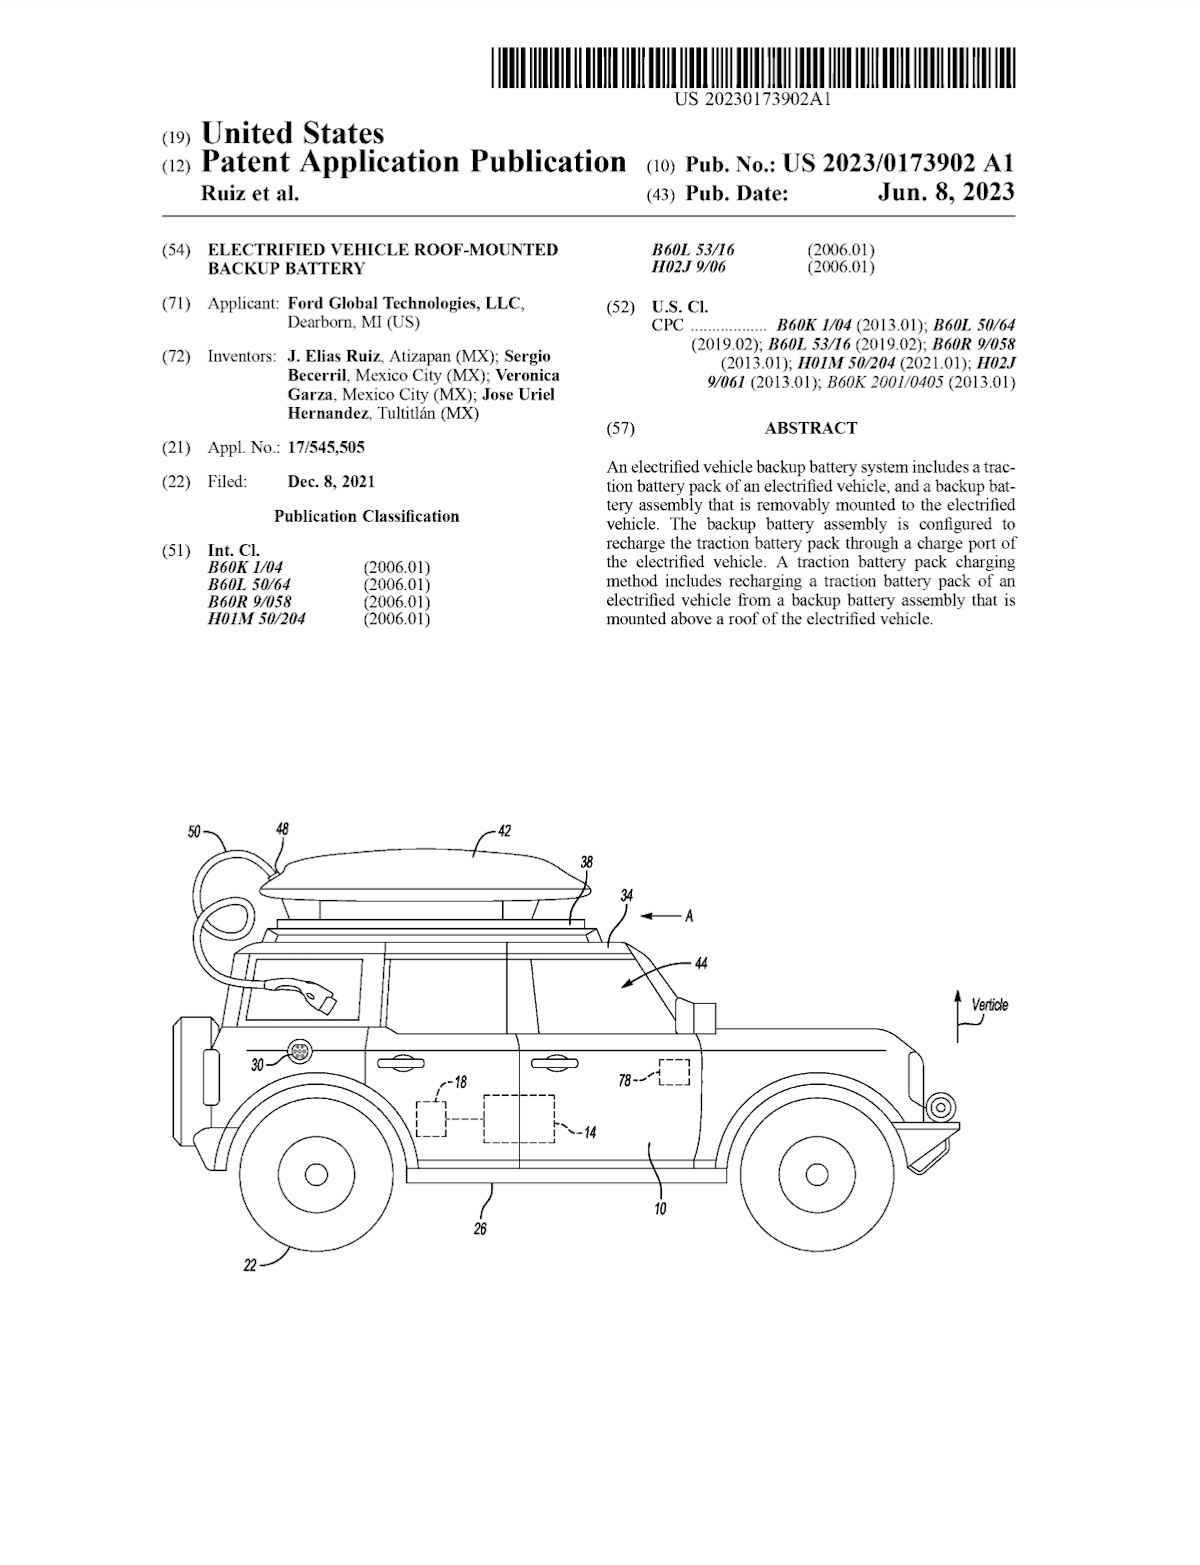 Ford-patent-backup-battery